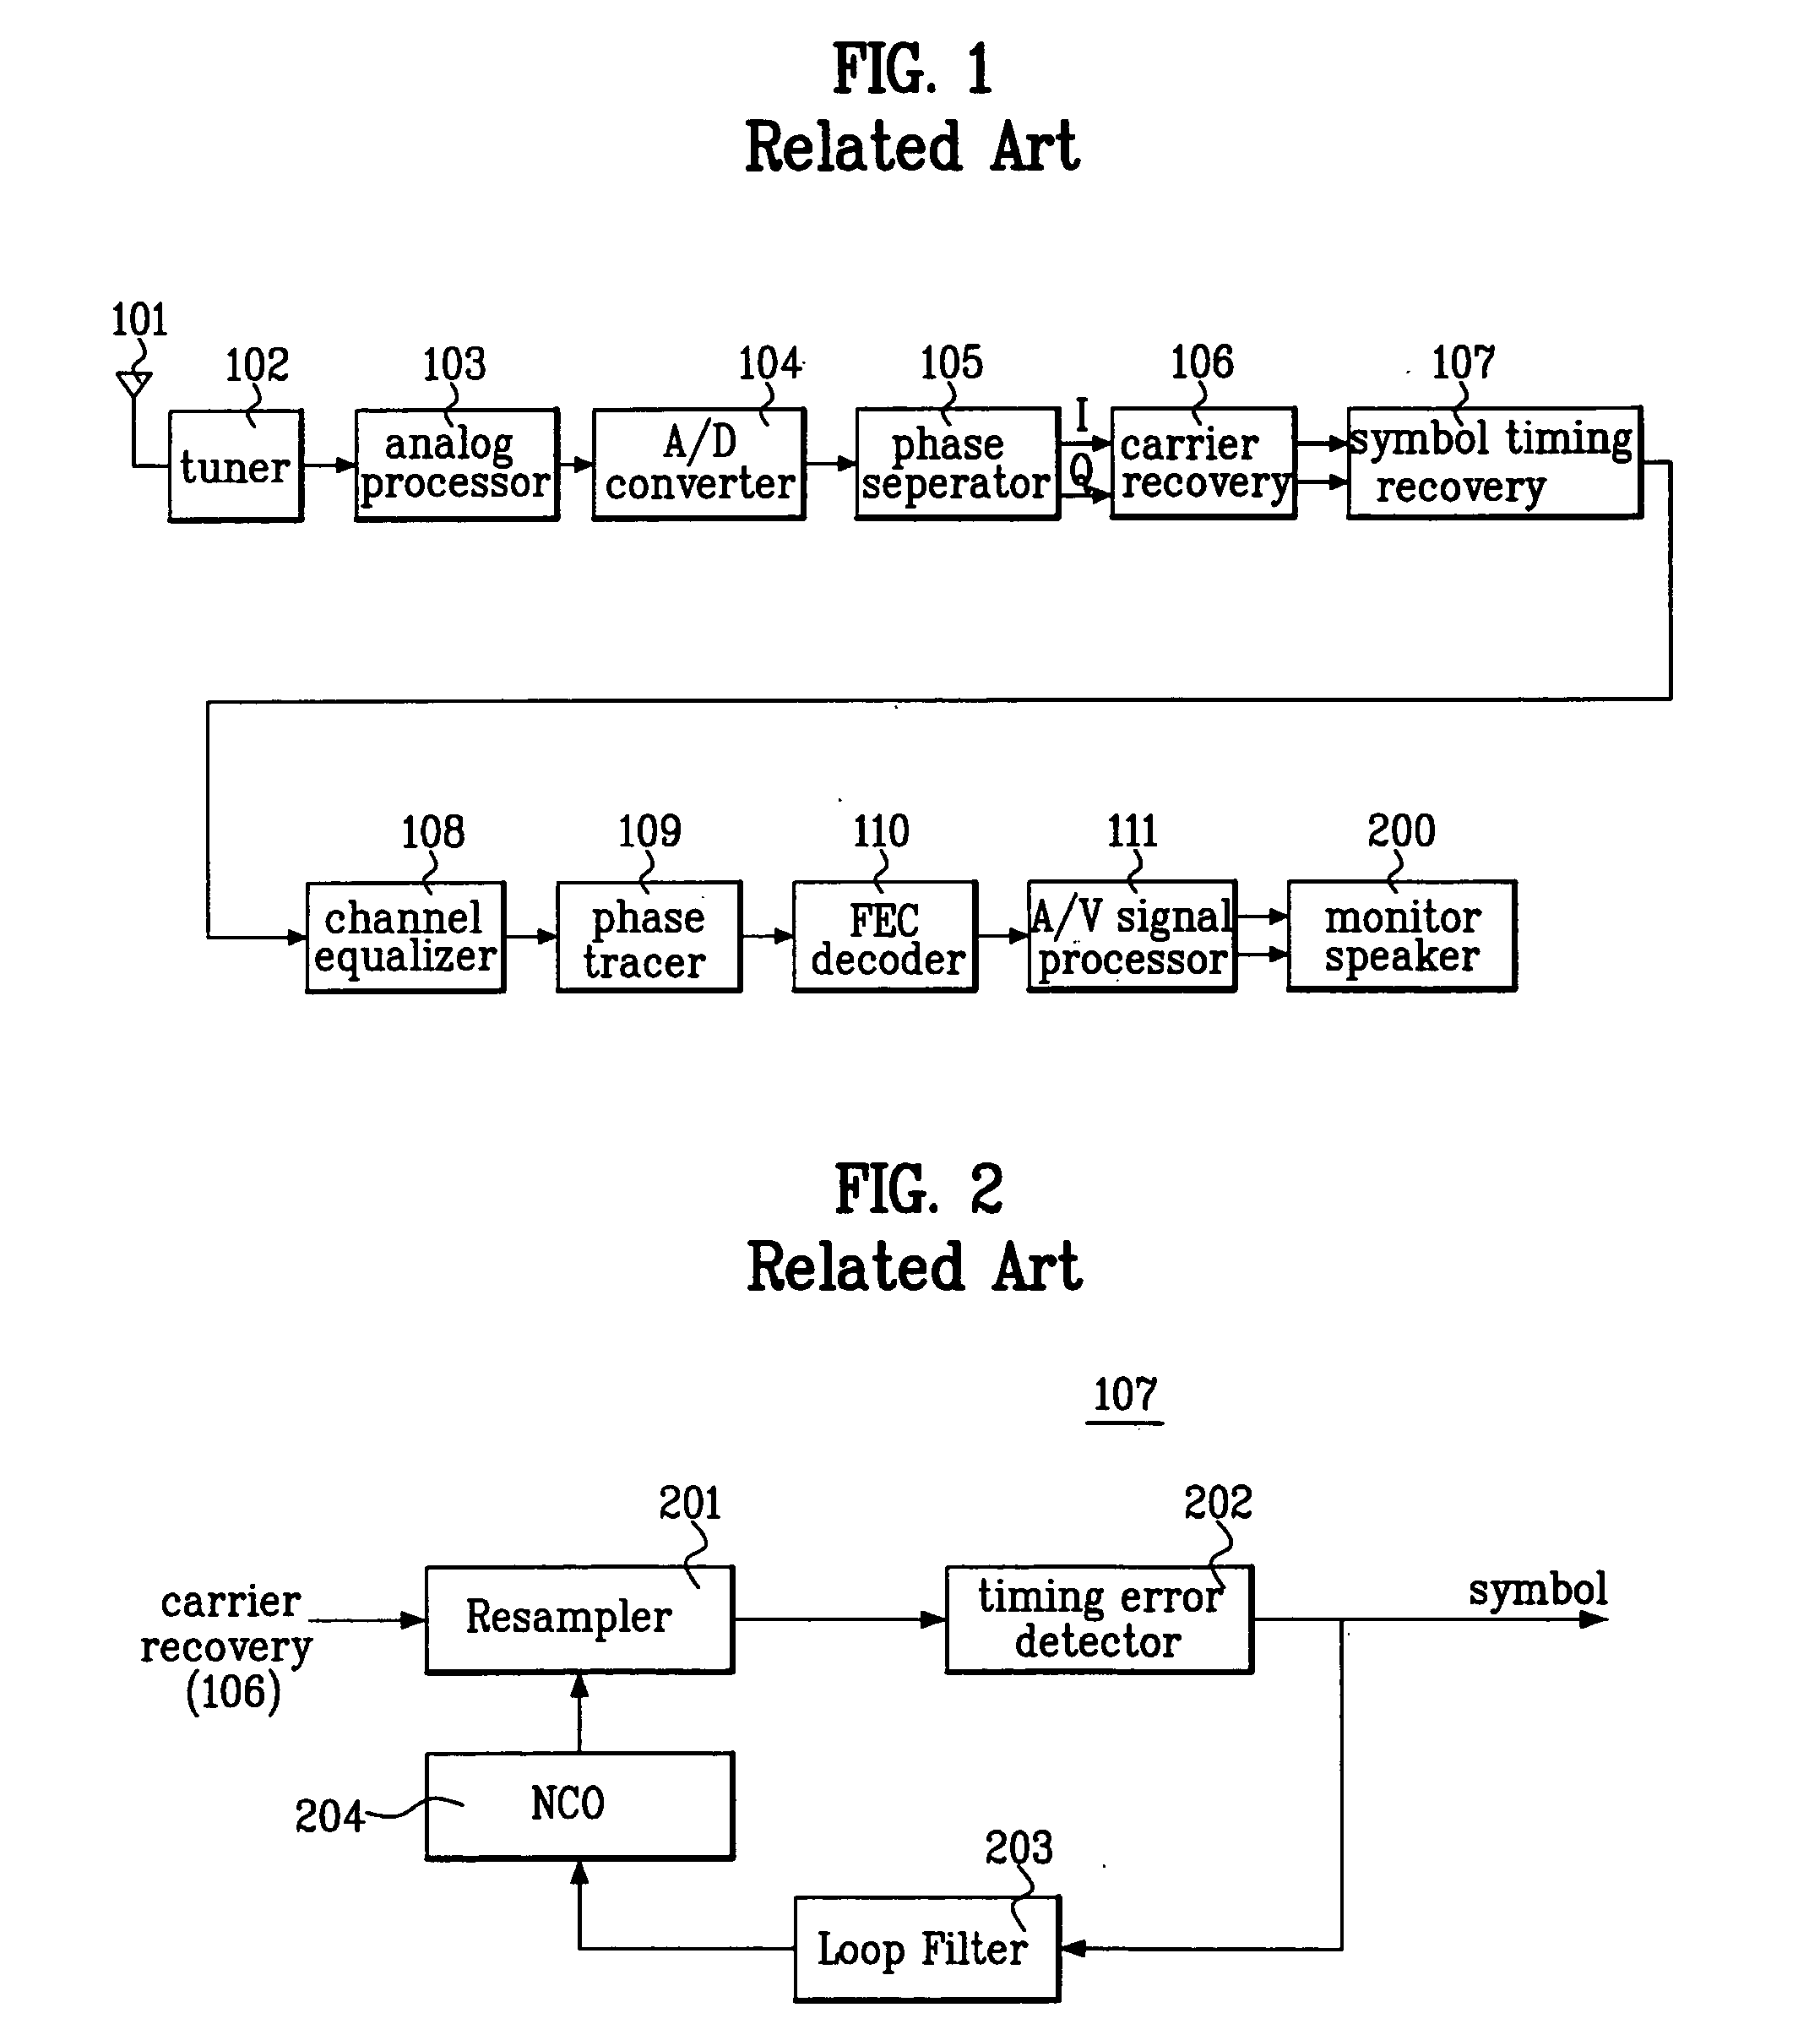 Symbol timing recovery and broadcast receiver using the same